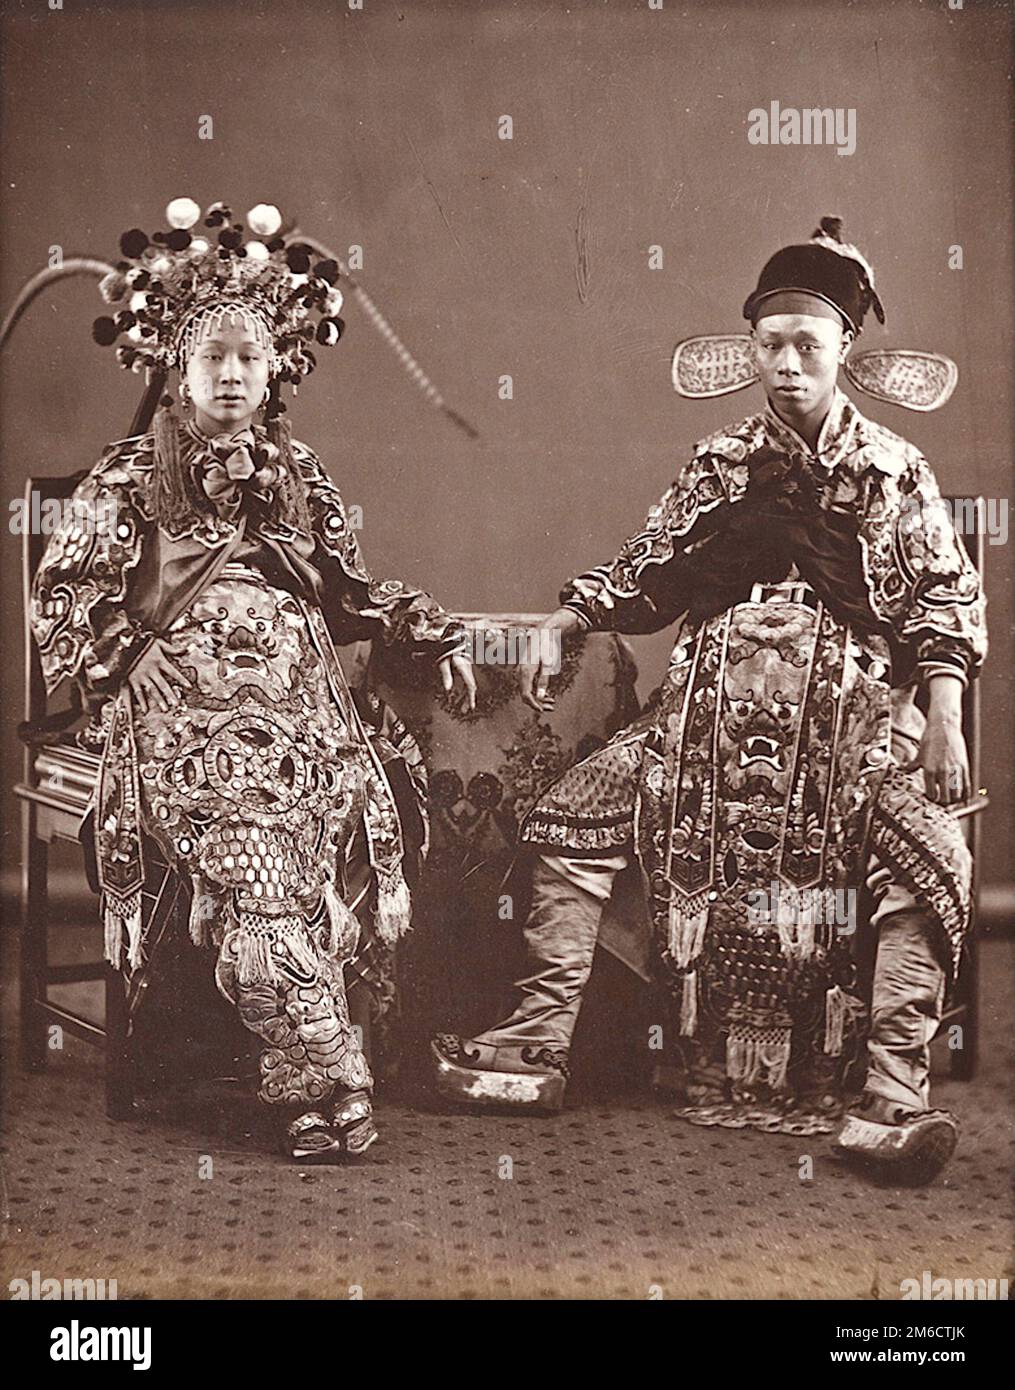 Lai Afong - Chinese Performers - Chinese Performers. 1870's - Chinese performers in theatrical costumes. Stock Photo